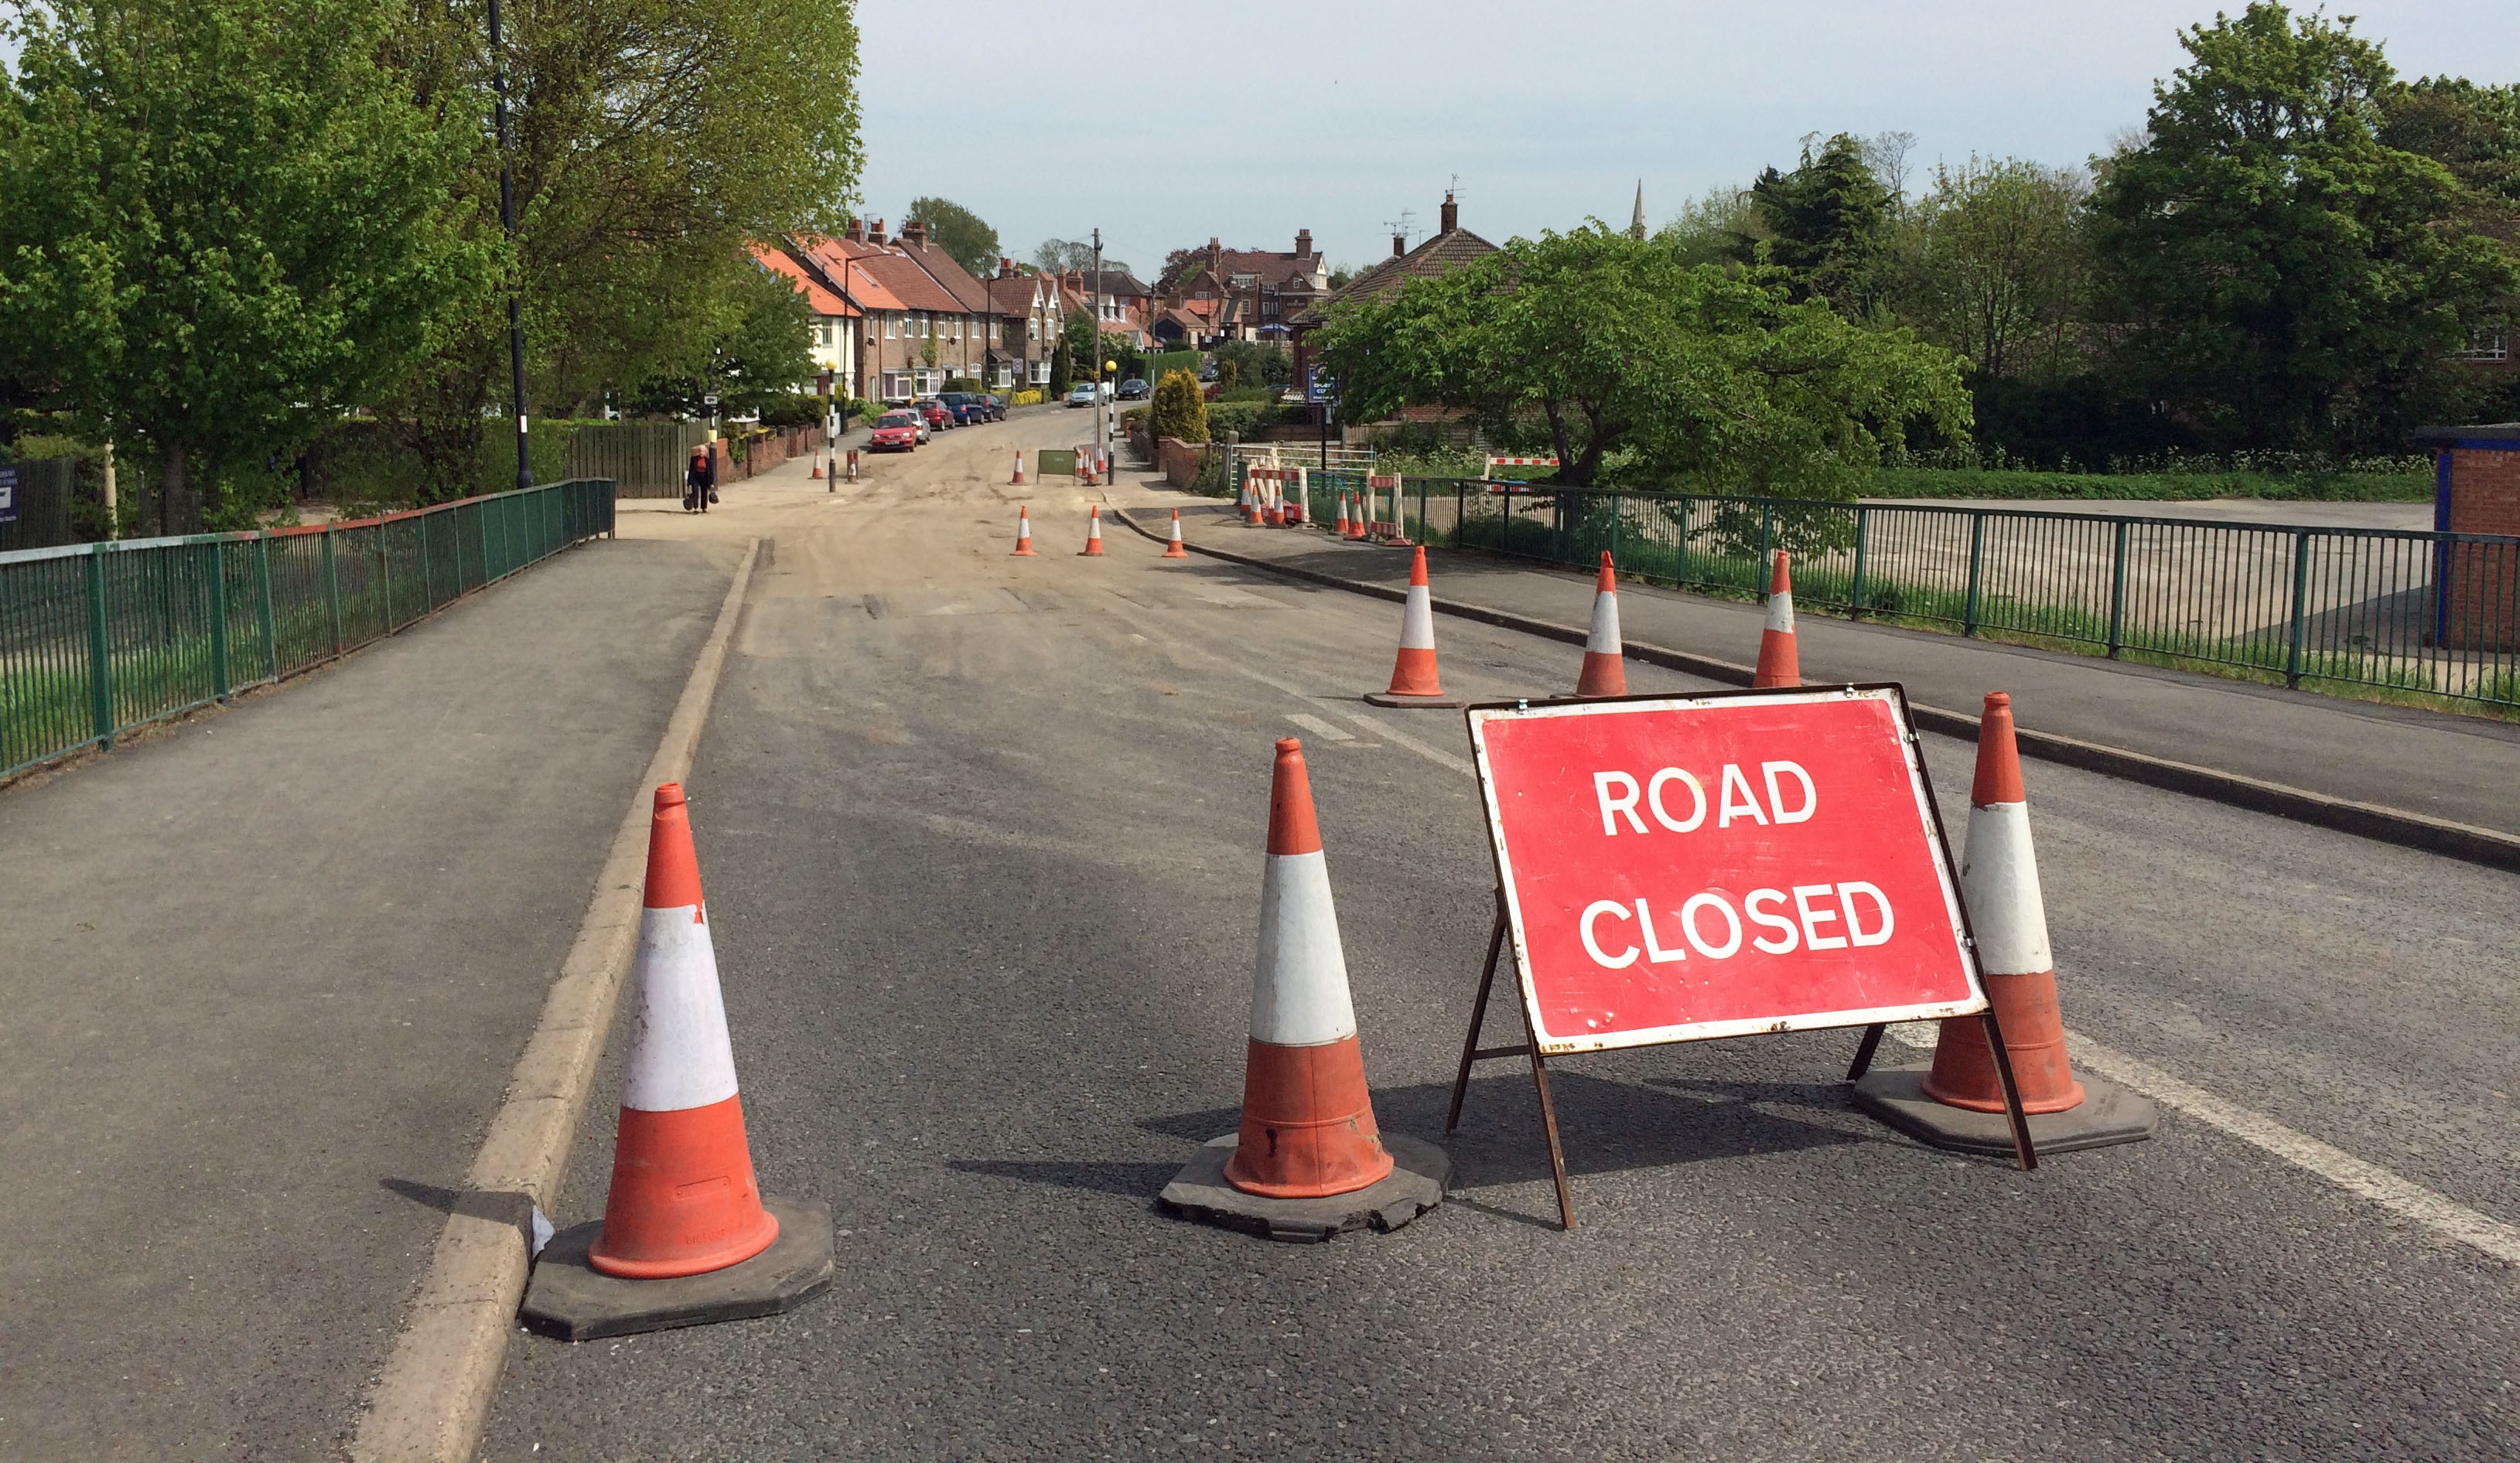 St Helen's Road 1400 hours 15th may 2015. Workers and plant gone. Road still officially closed.